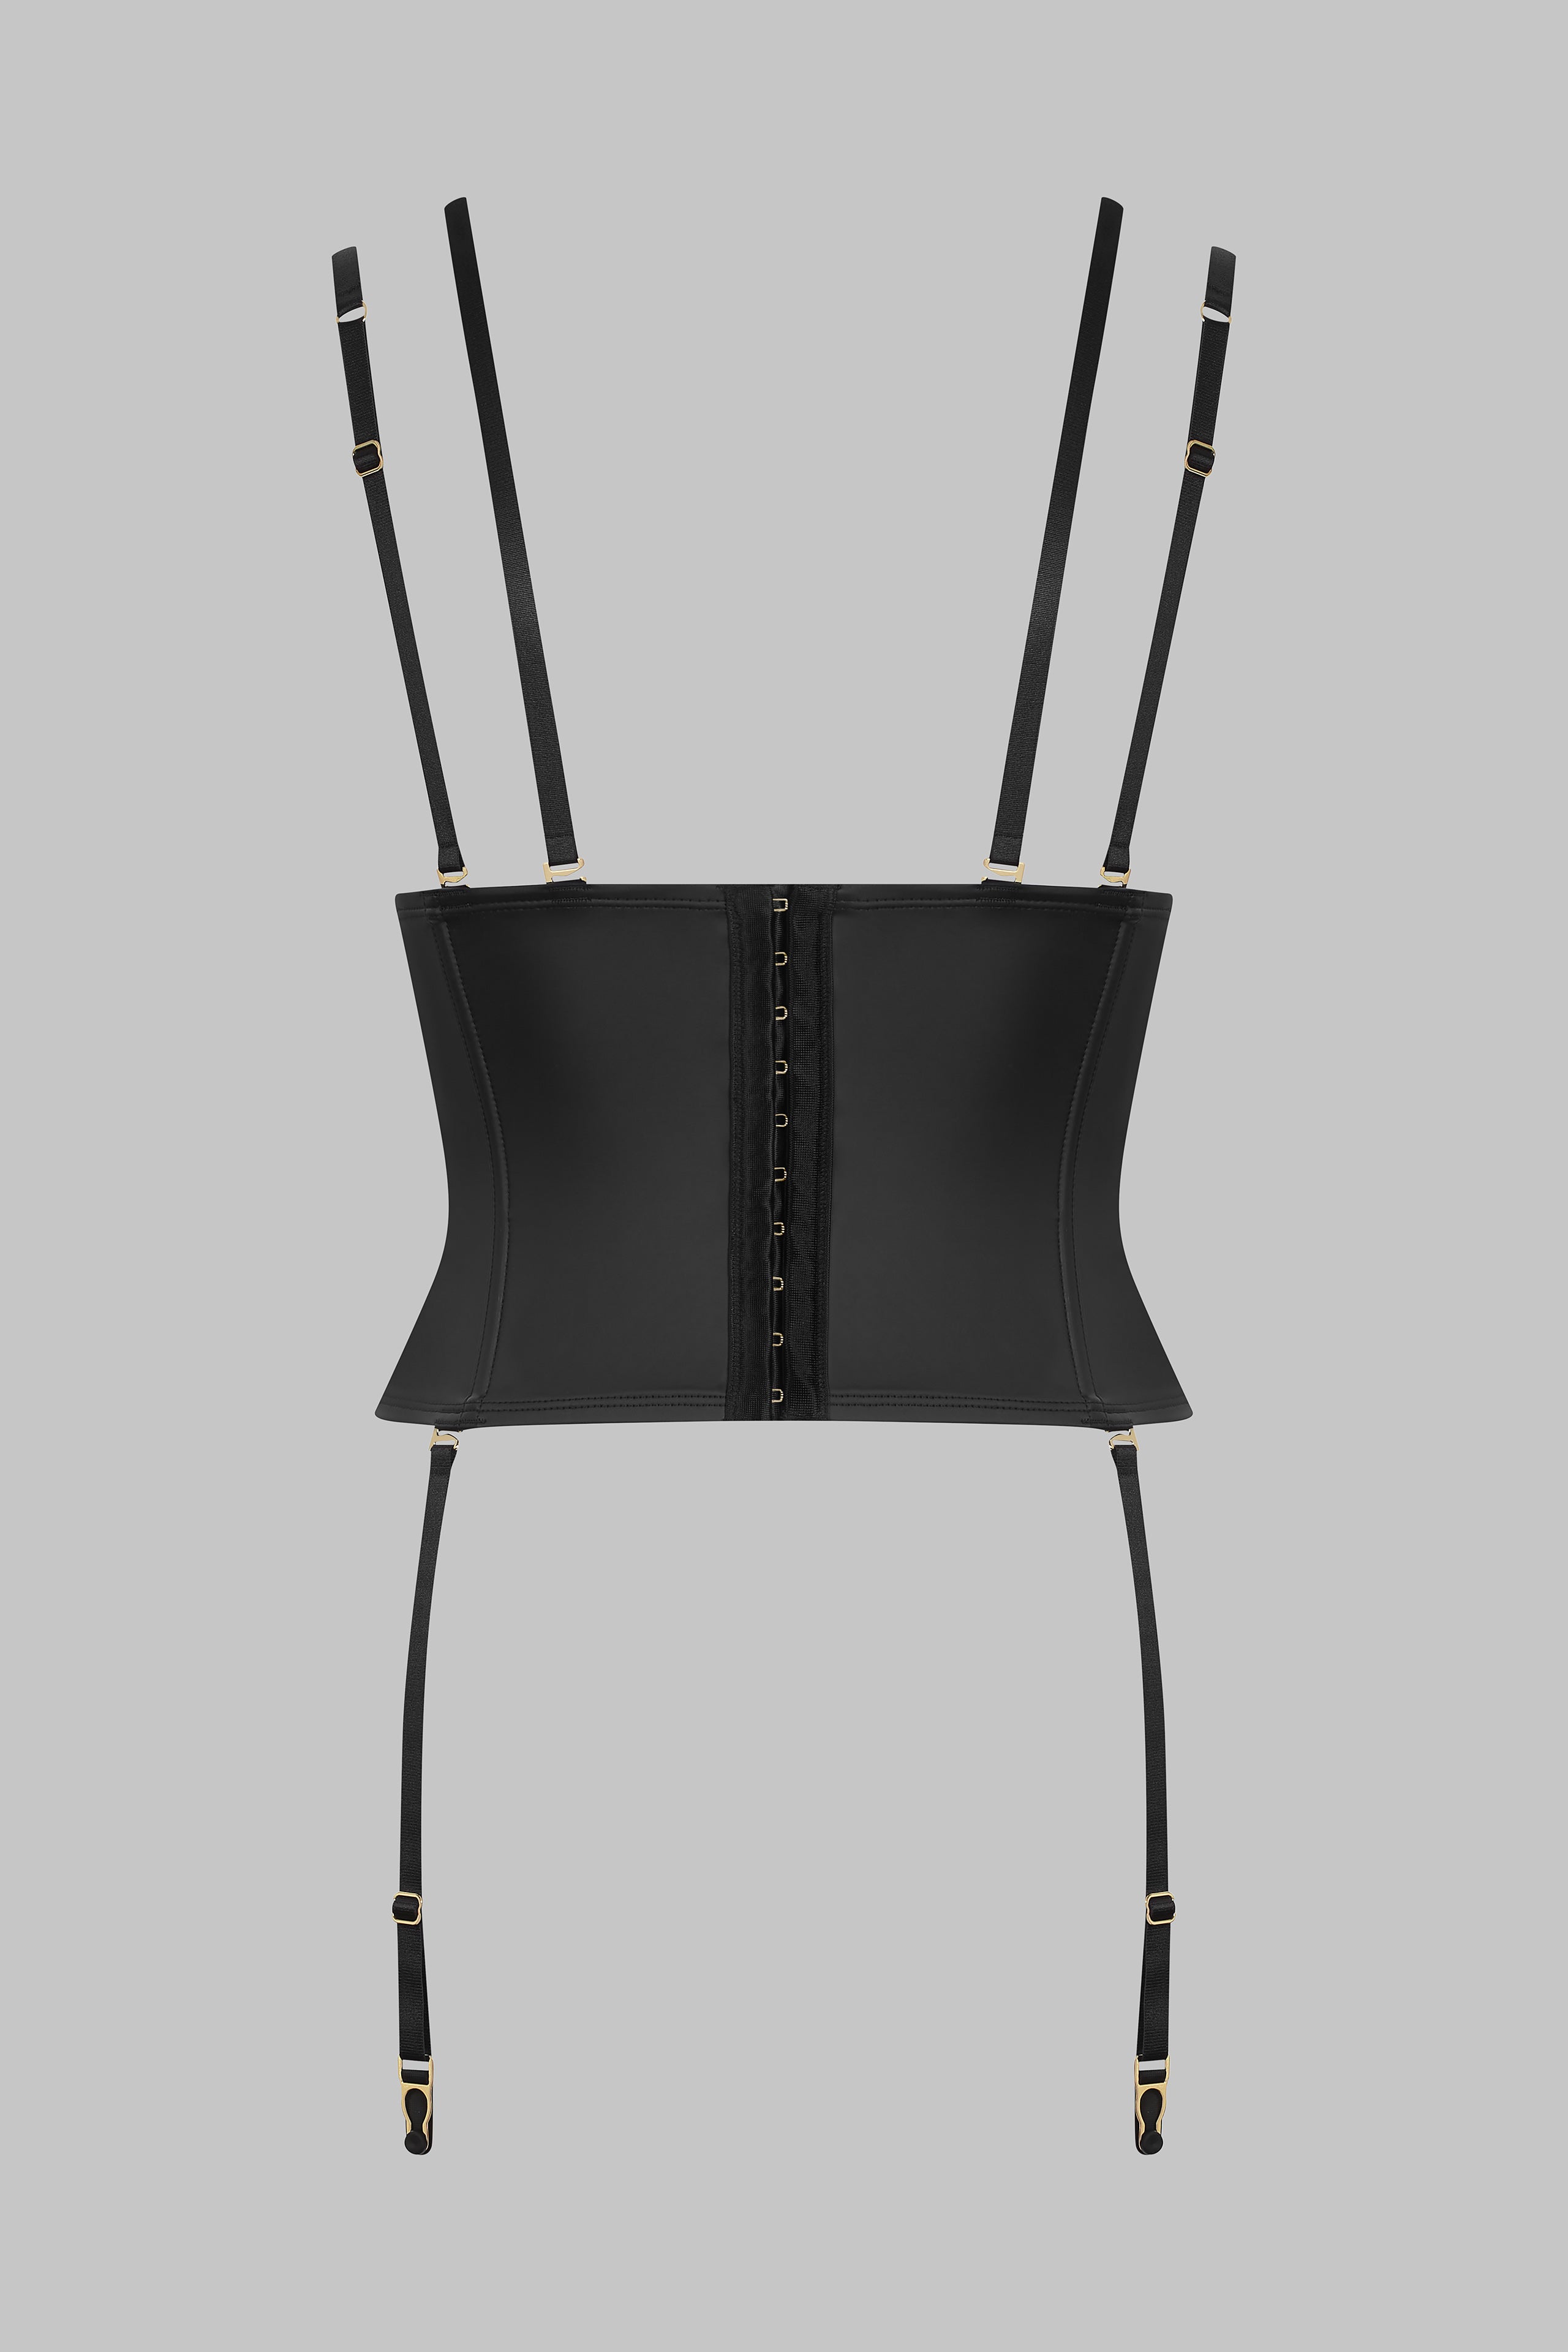 Waist cinched with suspenders - Chambre Noire